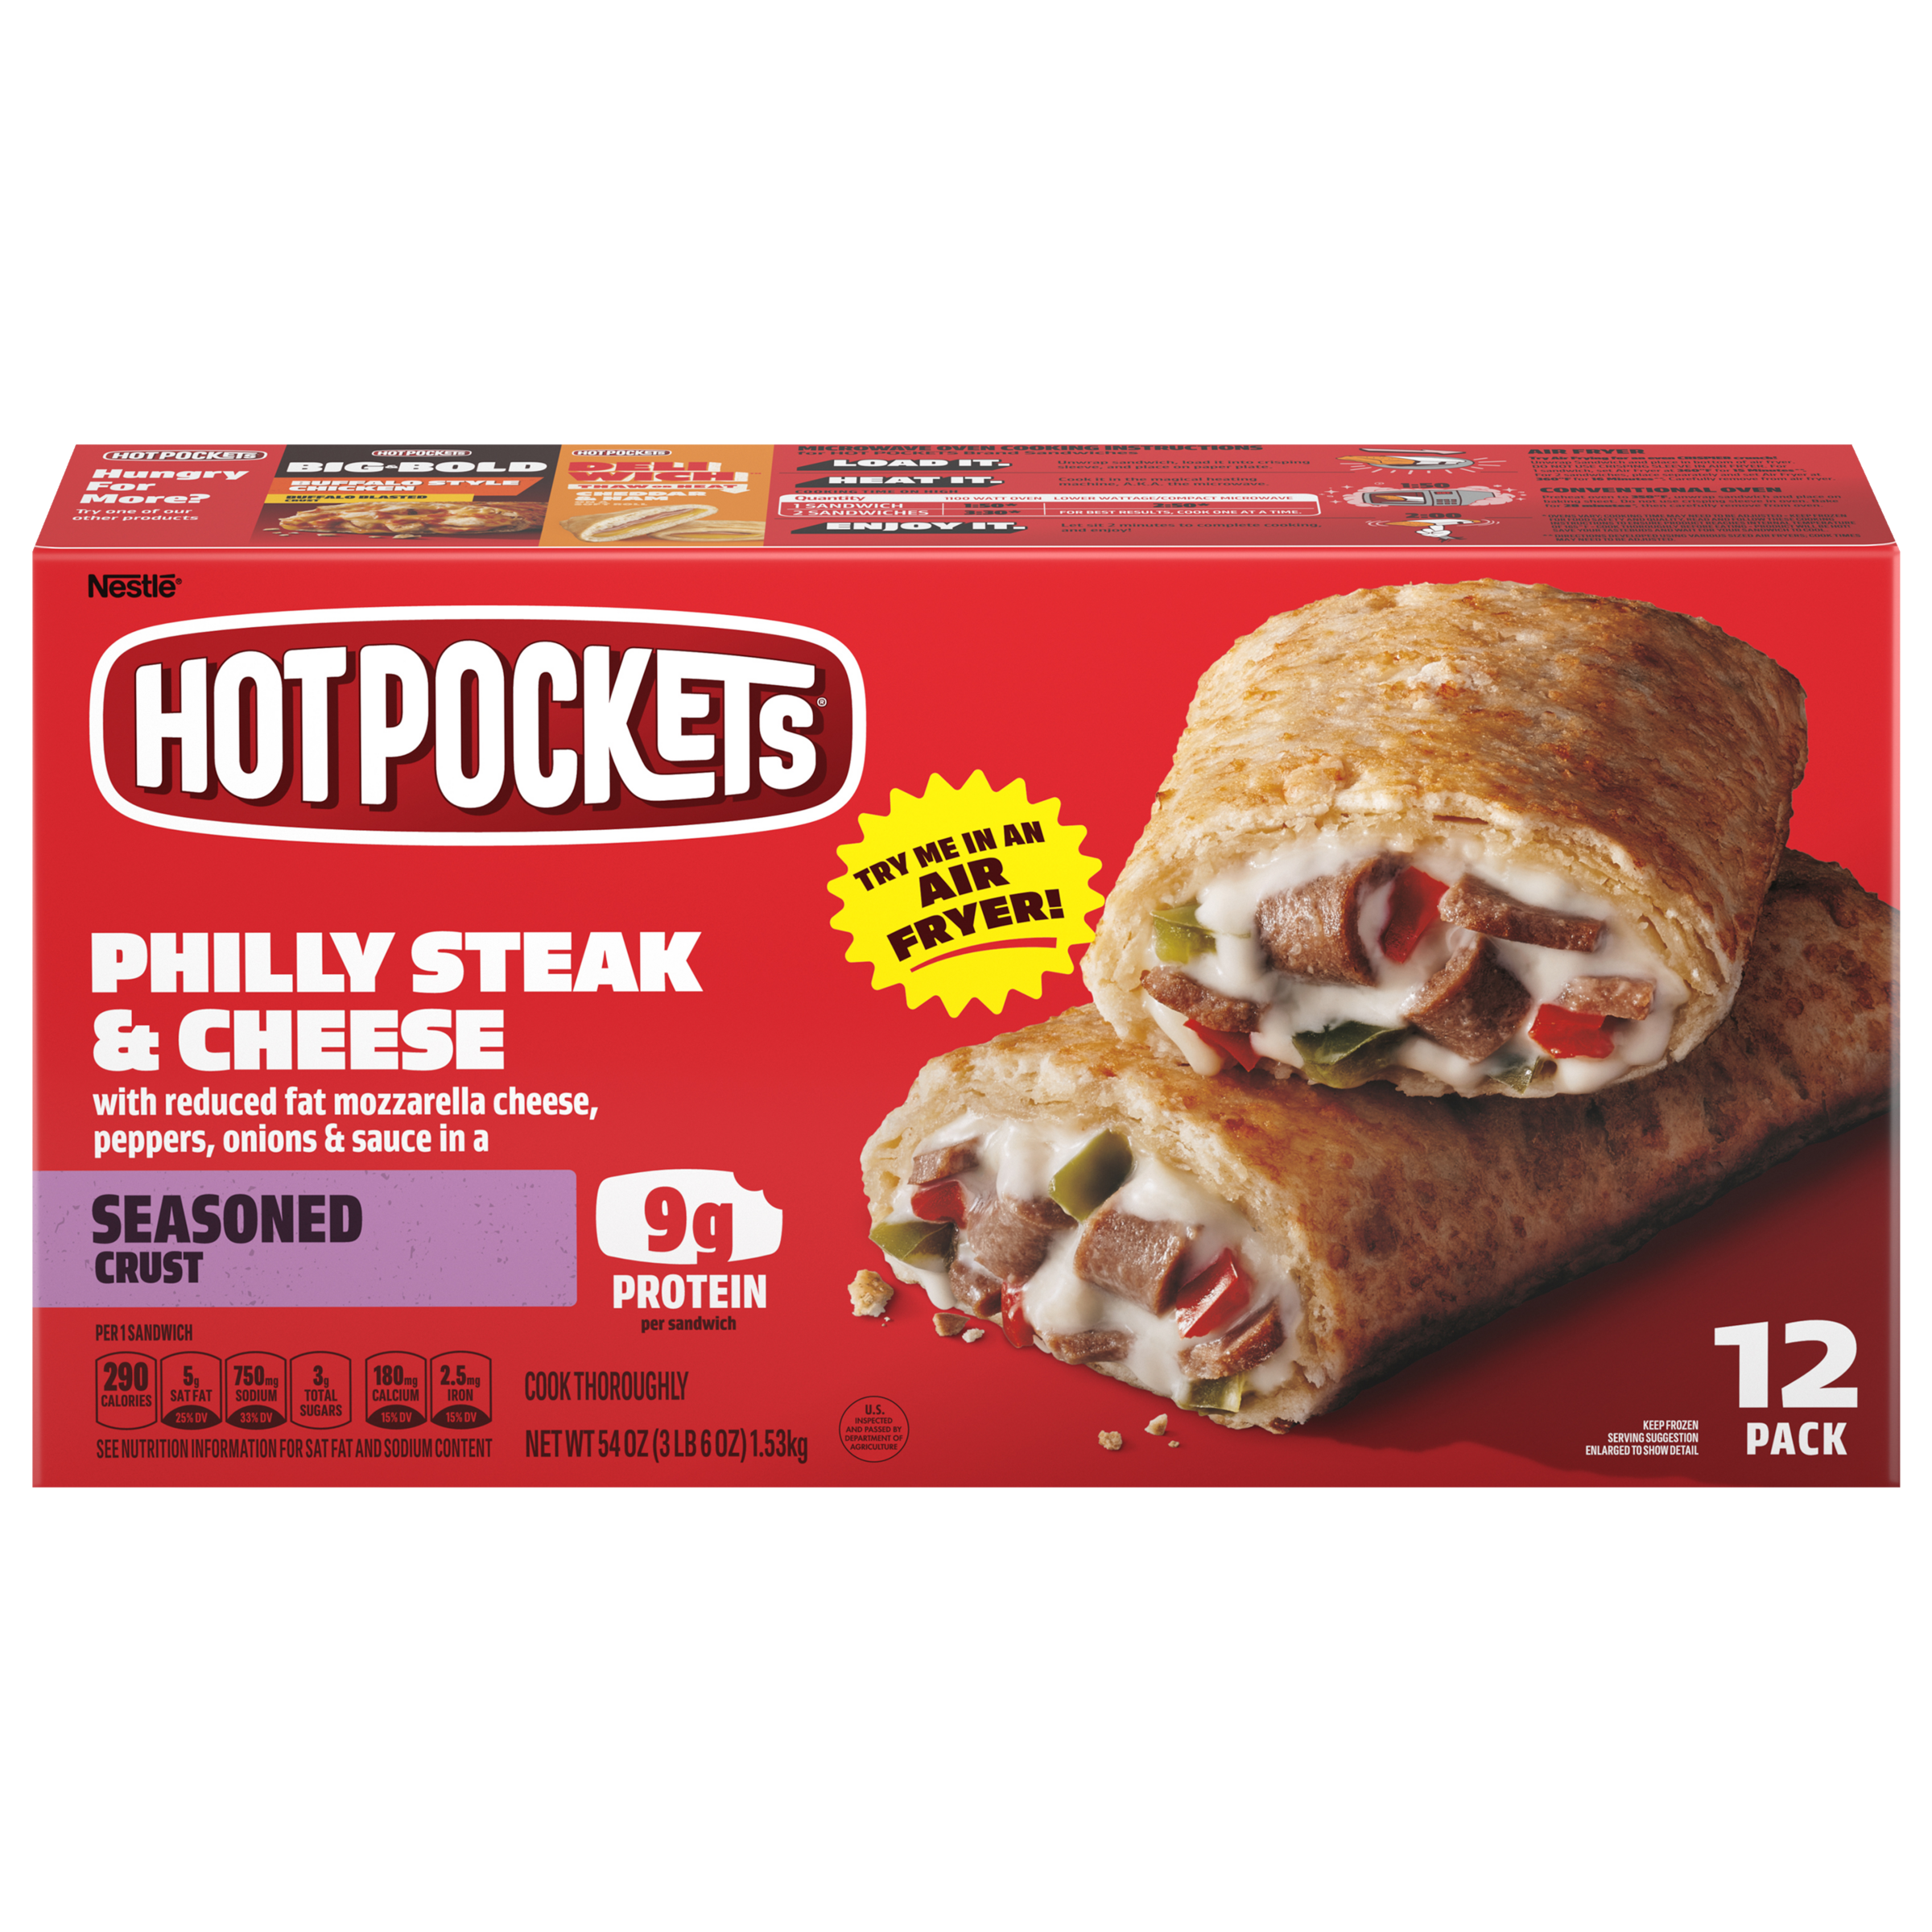 HOT POCKETS Philly Steak and Cheese 4 units per case 54.0 oz